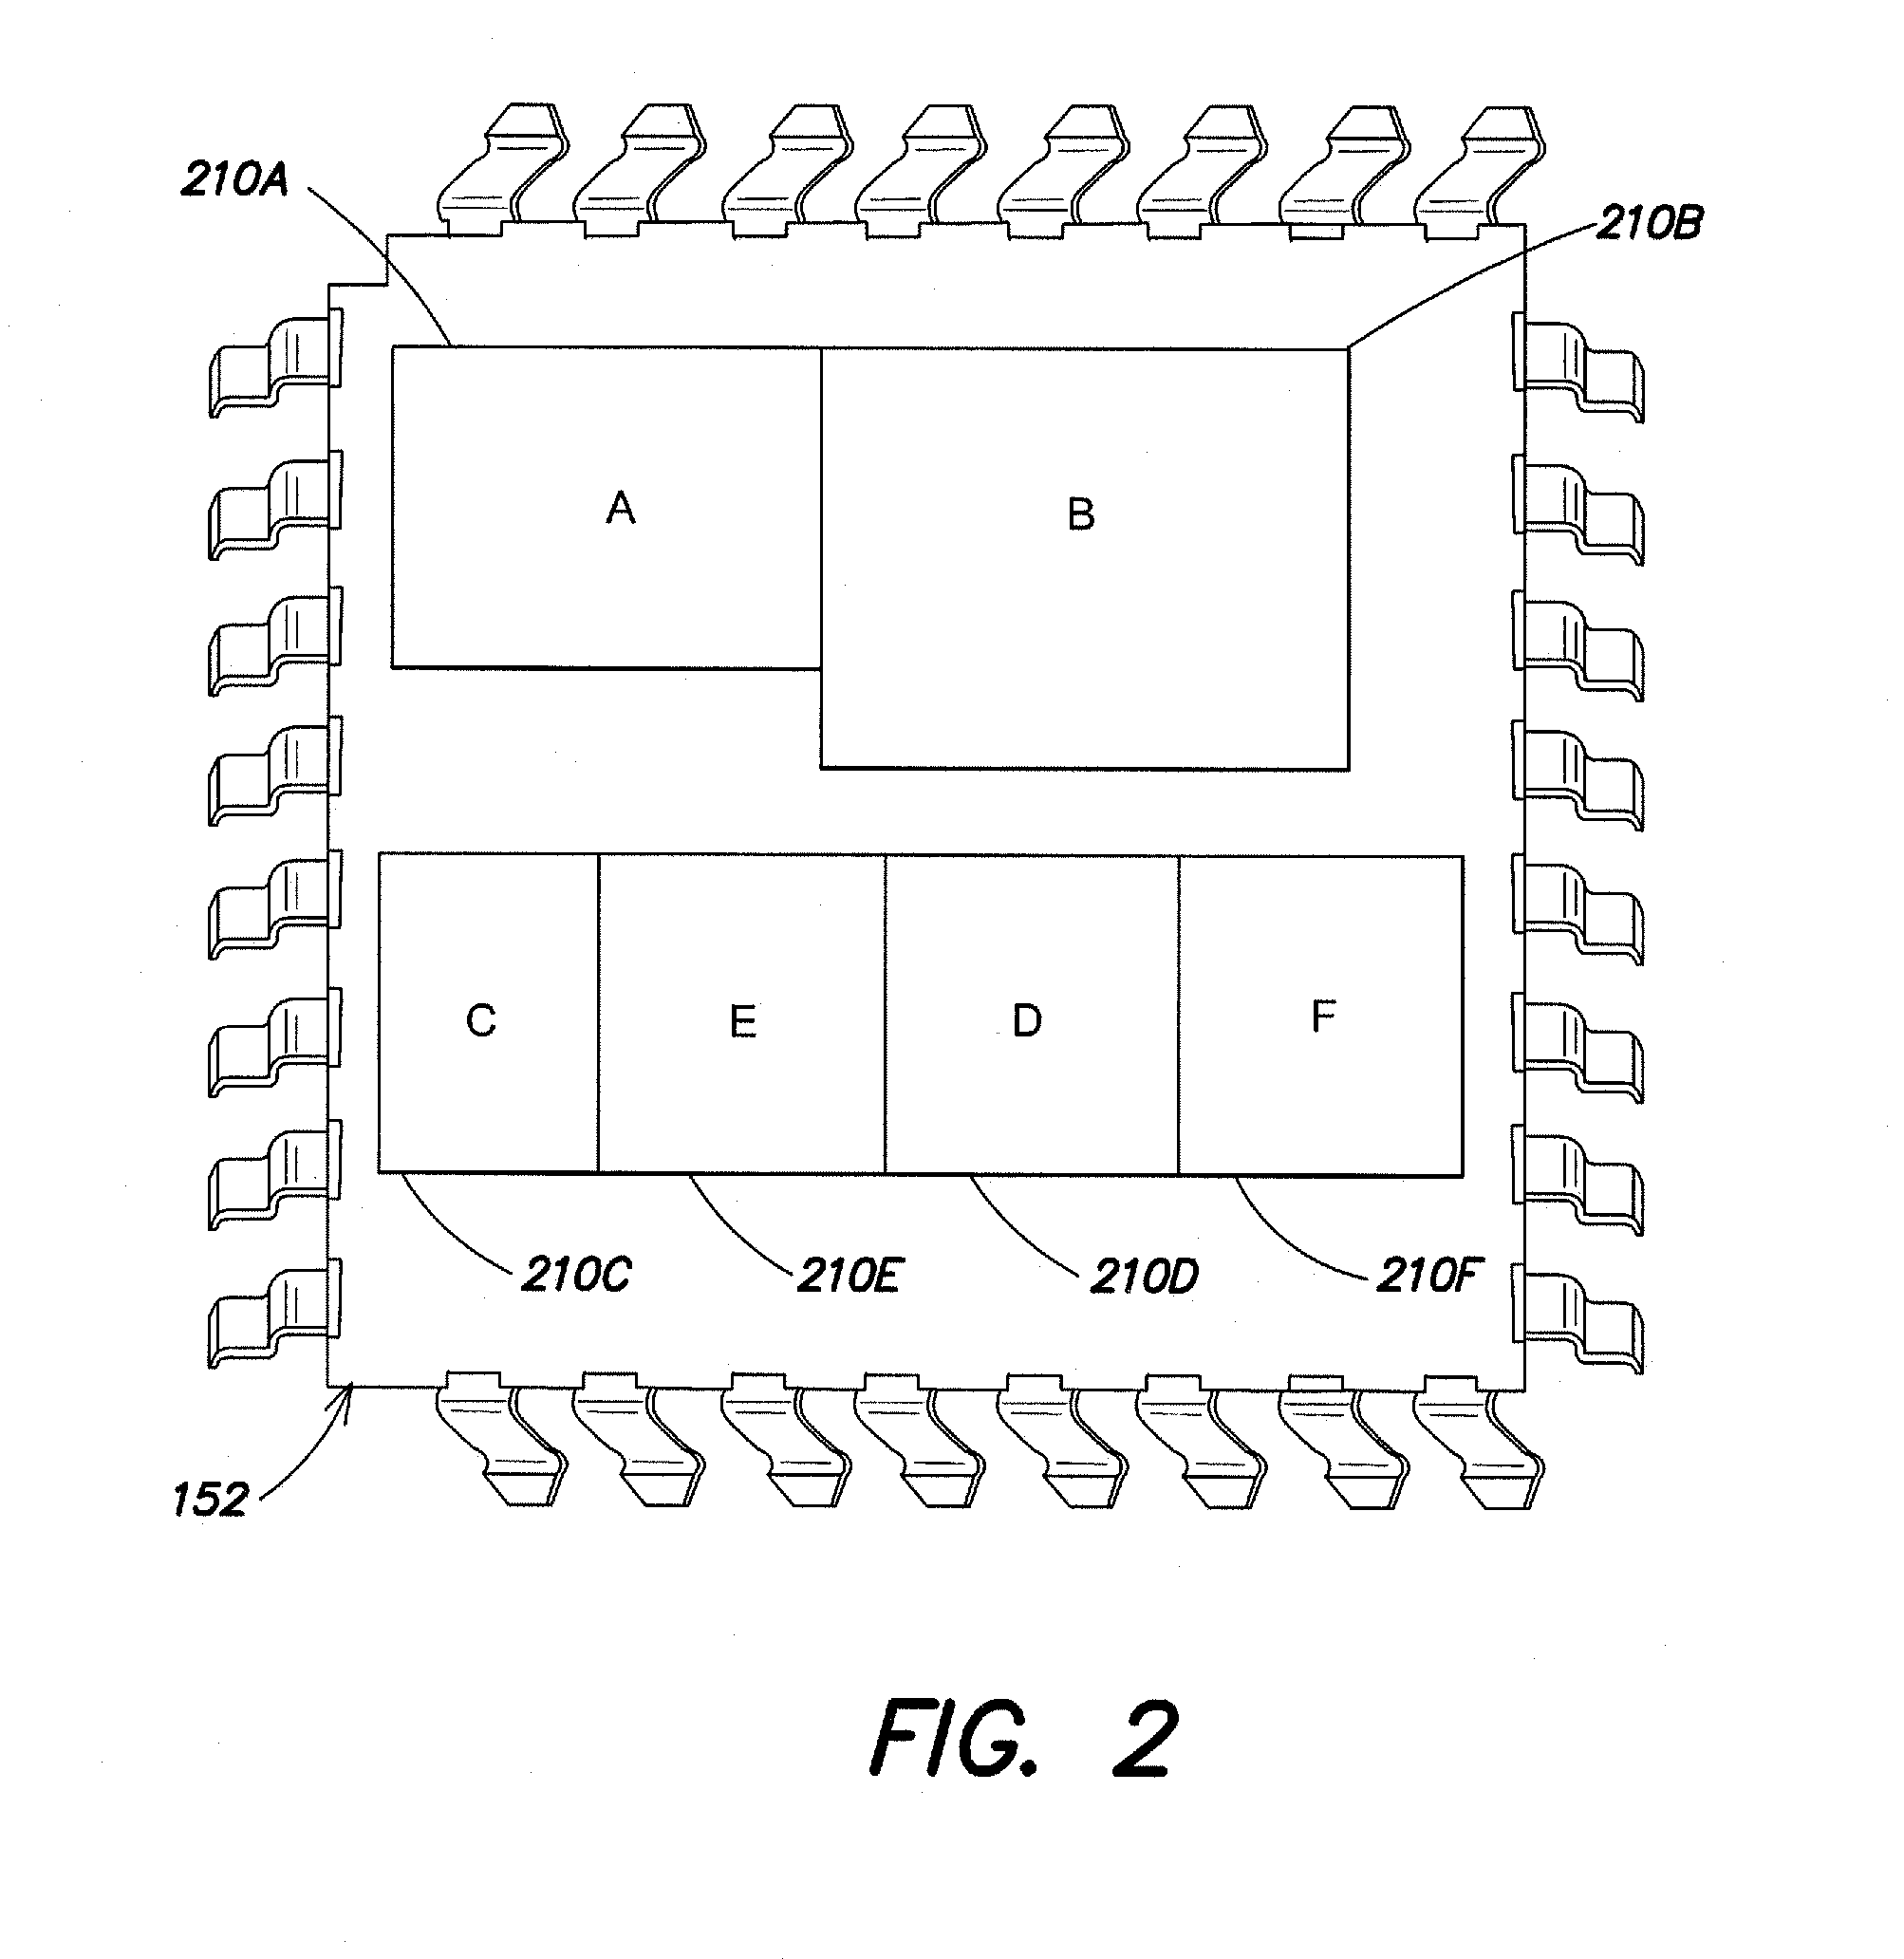 Test system supporting simplified configuration for controlling test block concurrency